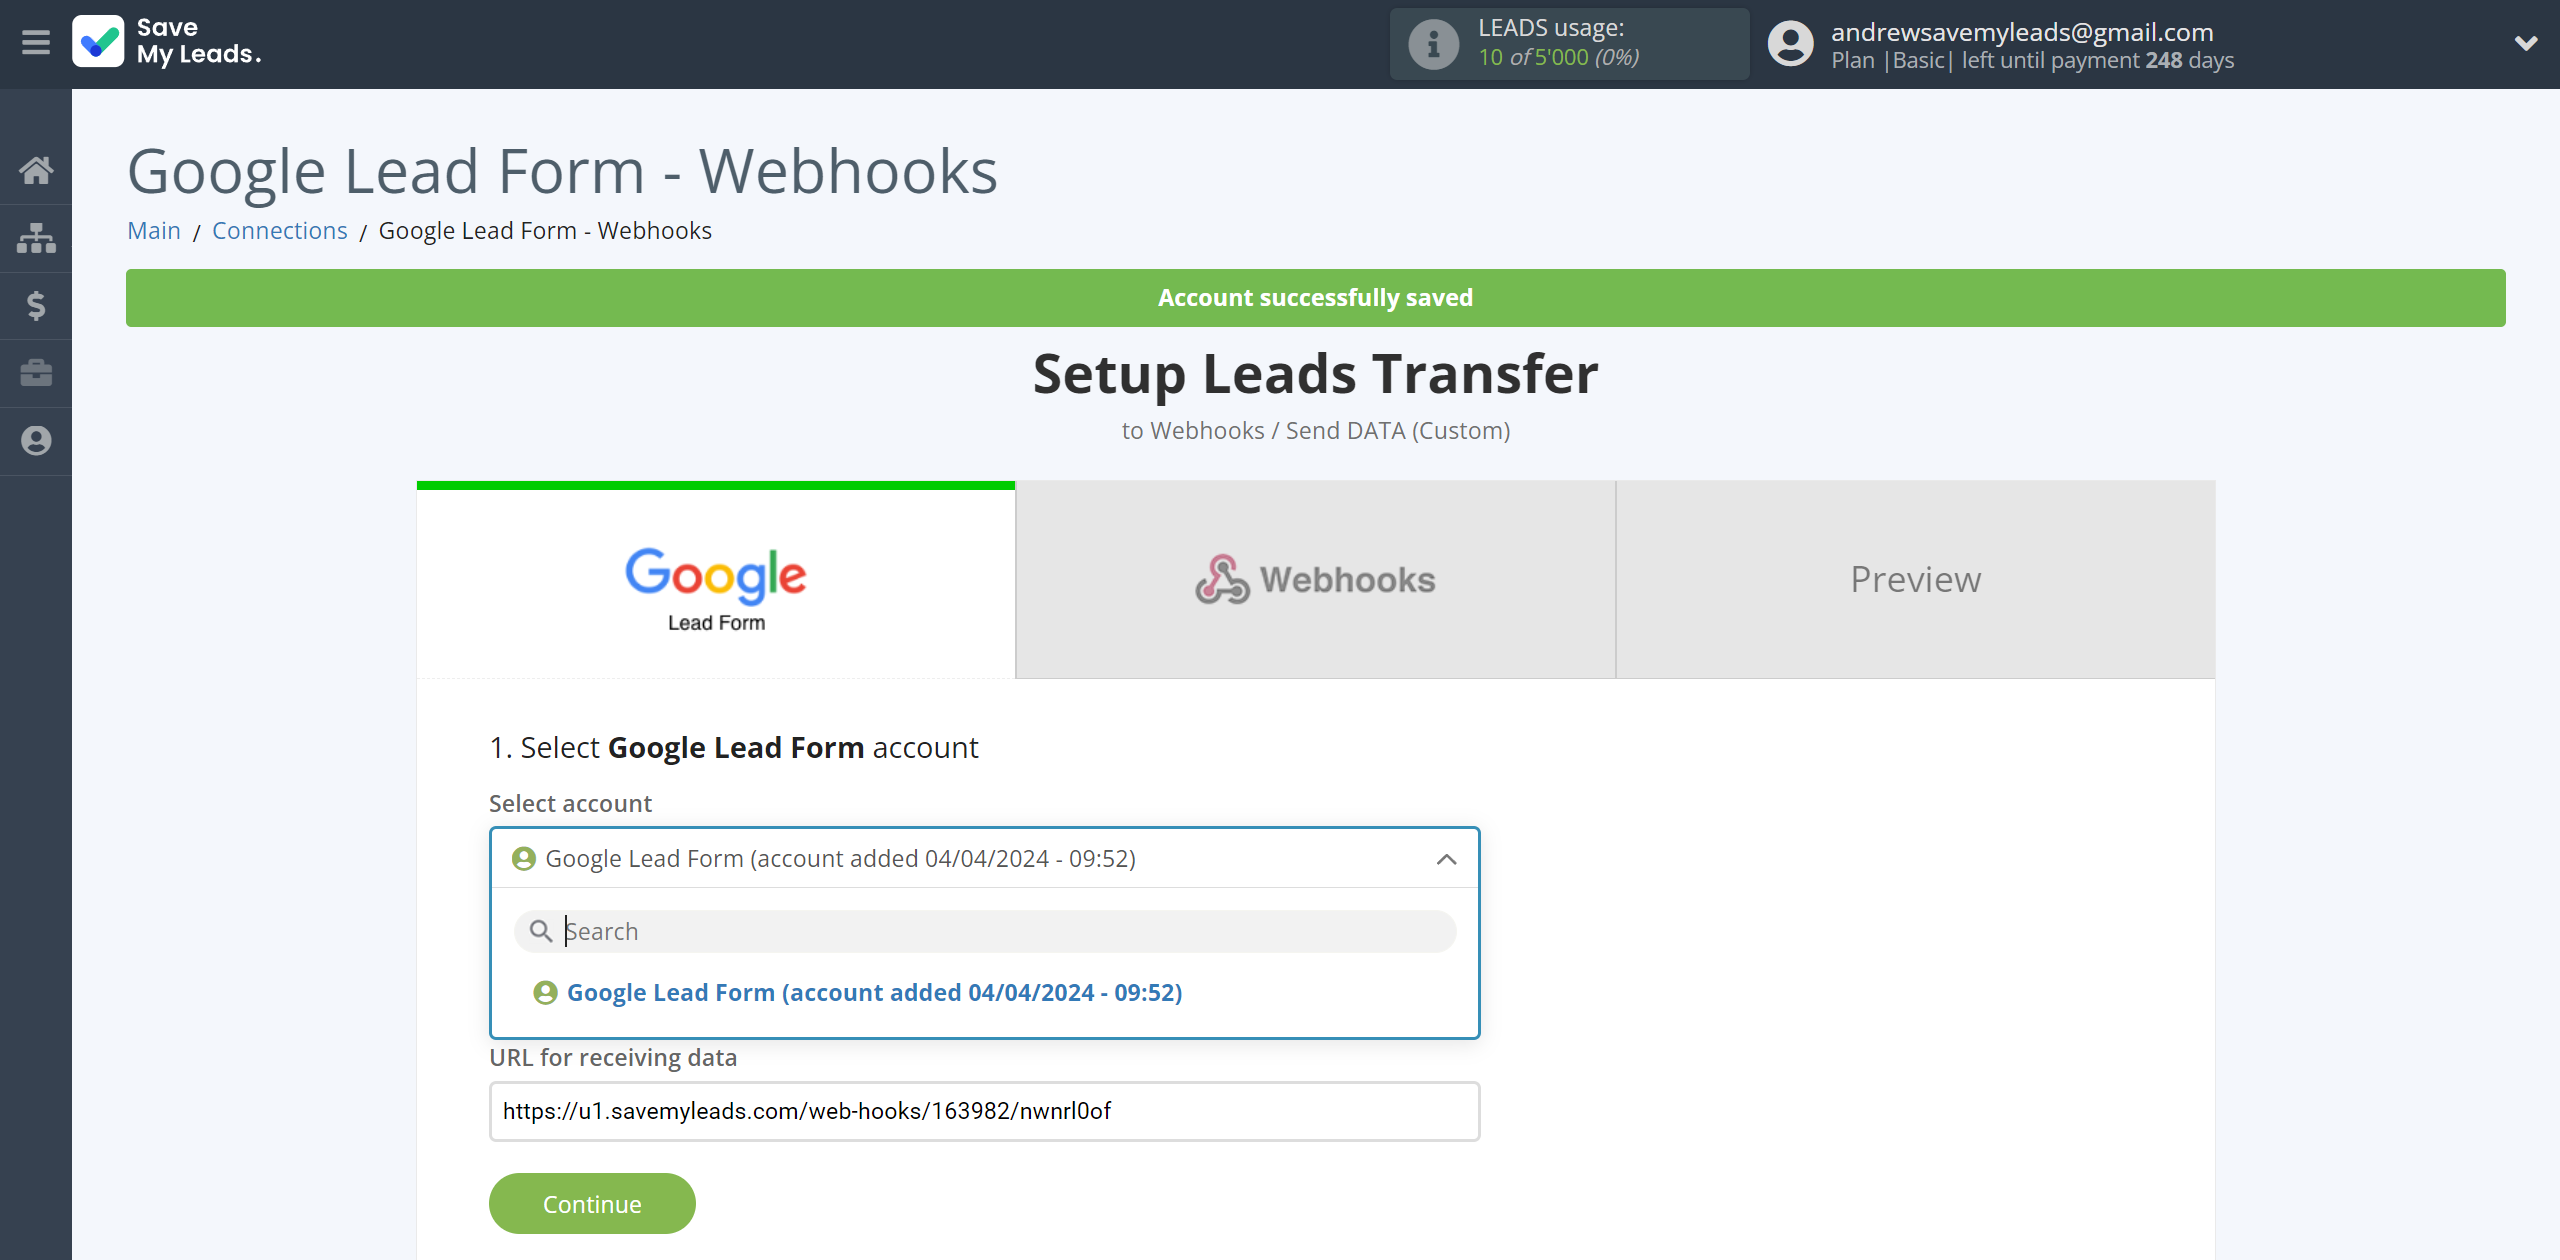 How to Connect Google Lead Form with Webhooks (Custom) | Data Source account selection